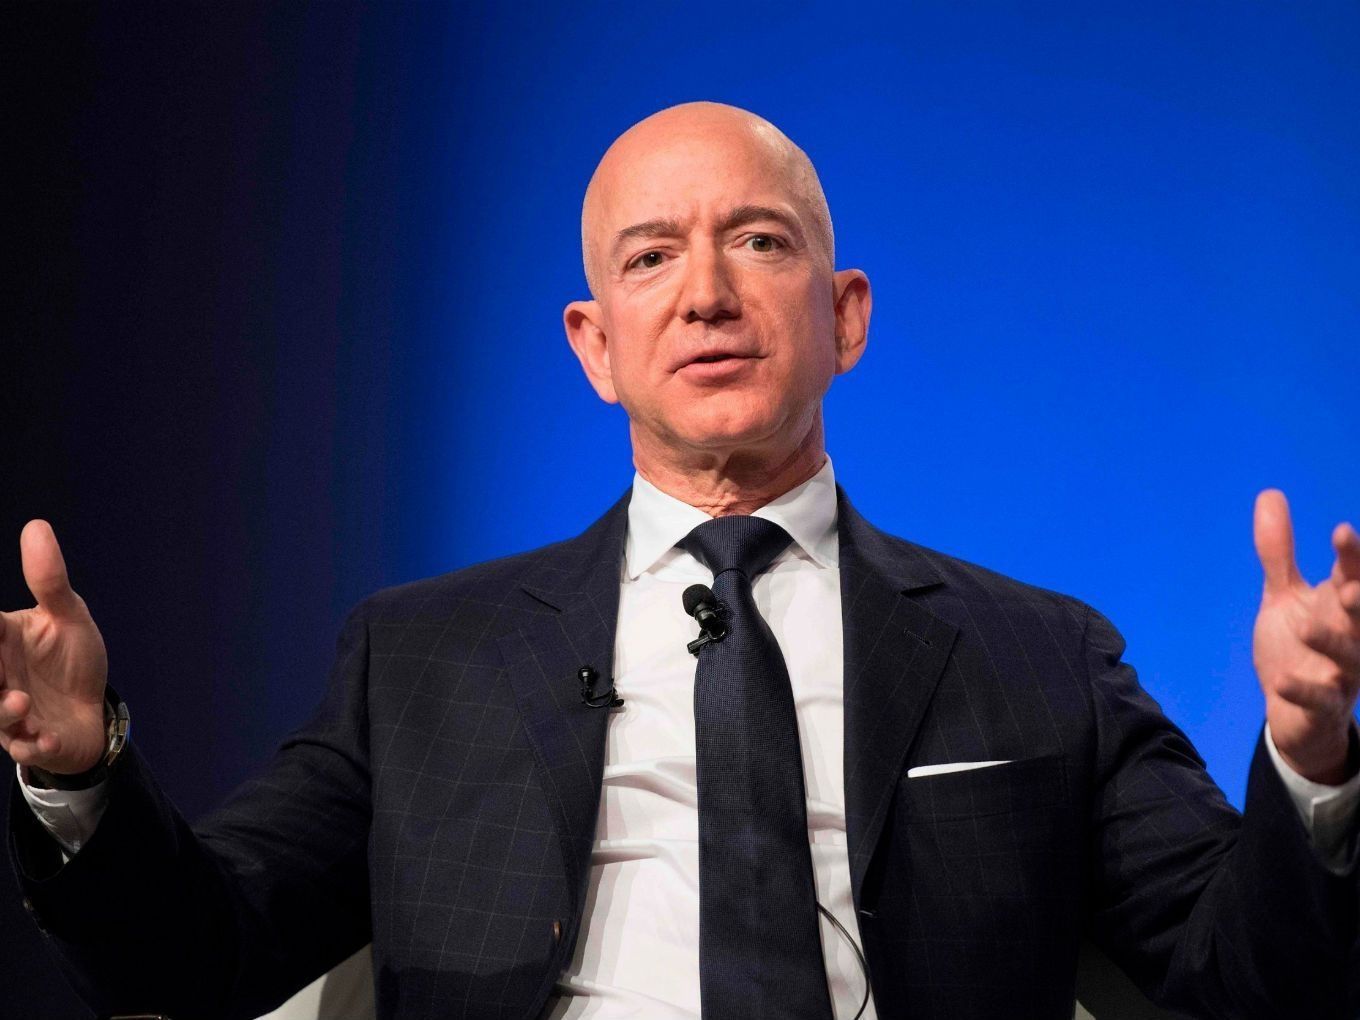 Amid Controversy, Jeff Bezos Chooses To Focus On Positives From India Visit